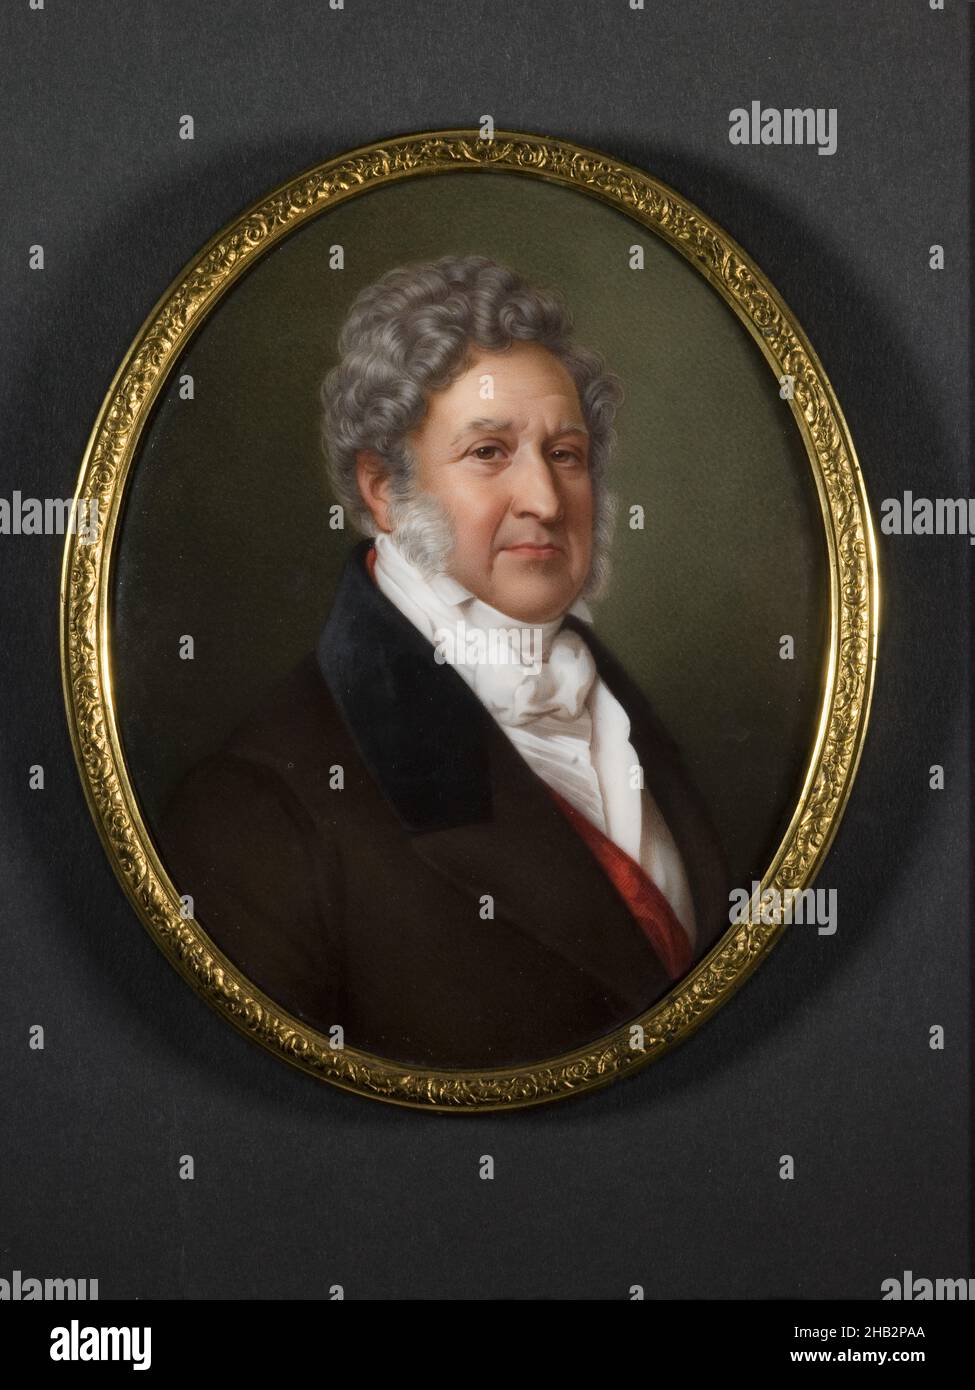 Louis-Philippe, Duc d'Orléans, King of France, Sophie Lienard, French, active 1842–1845, mid-19th century, Enamel on porcelain, Made in France, Europe, Miniature paintings, paintings, image (by sight): 5 1/16 x 4 1/16 in. (12.9 x 10.3 cm Stock Photo